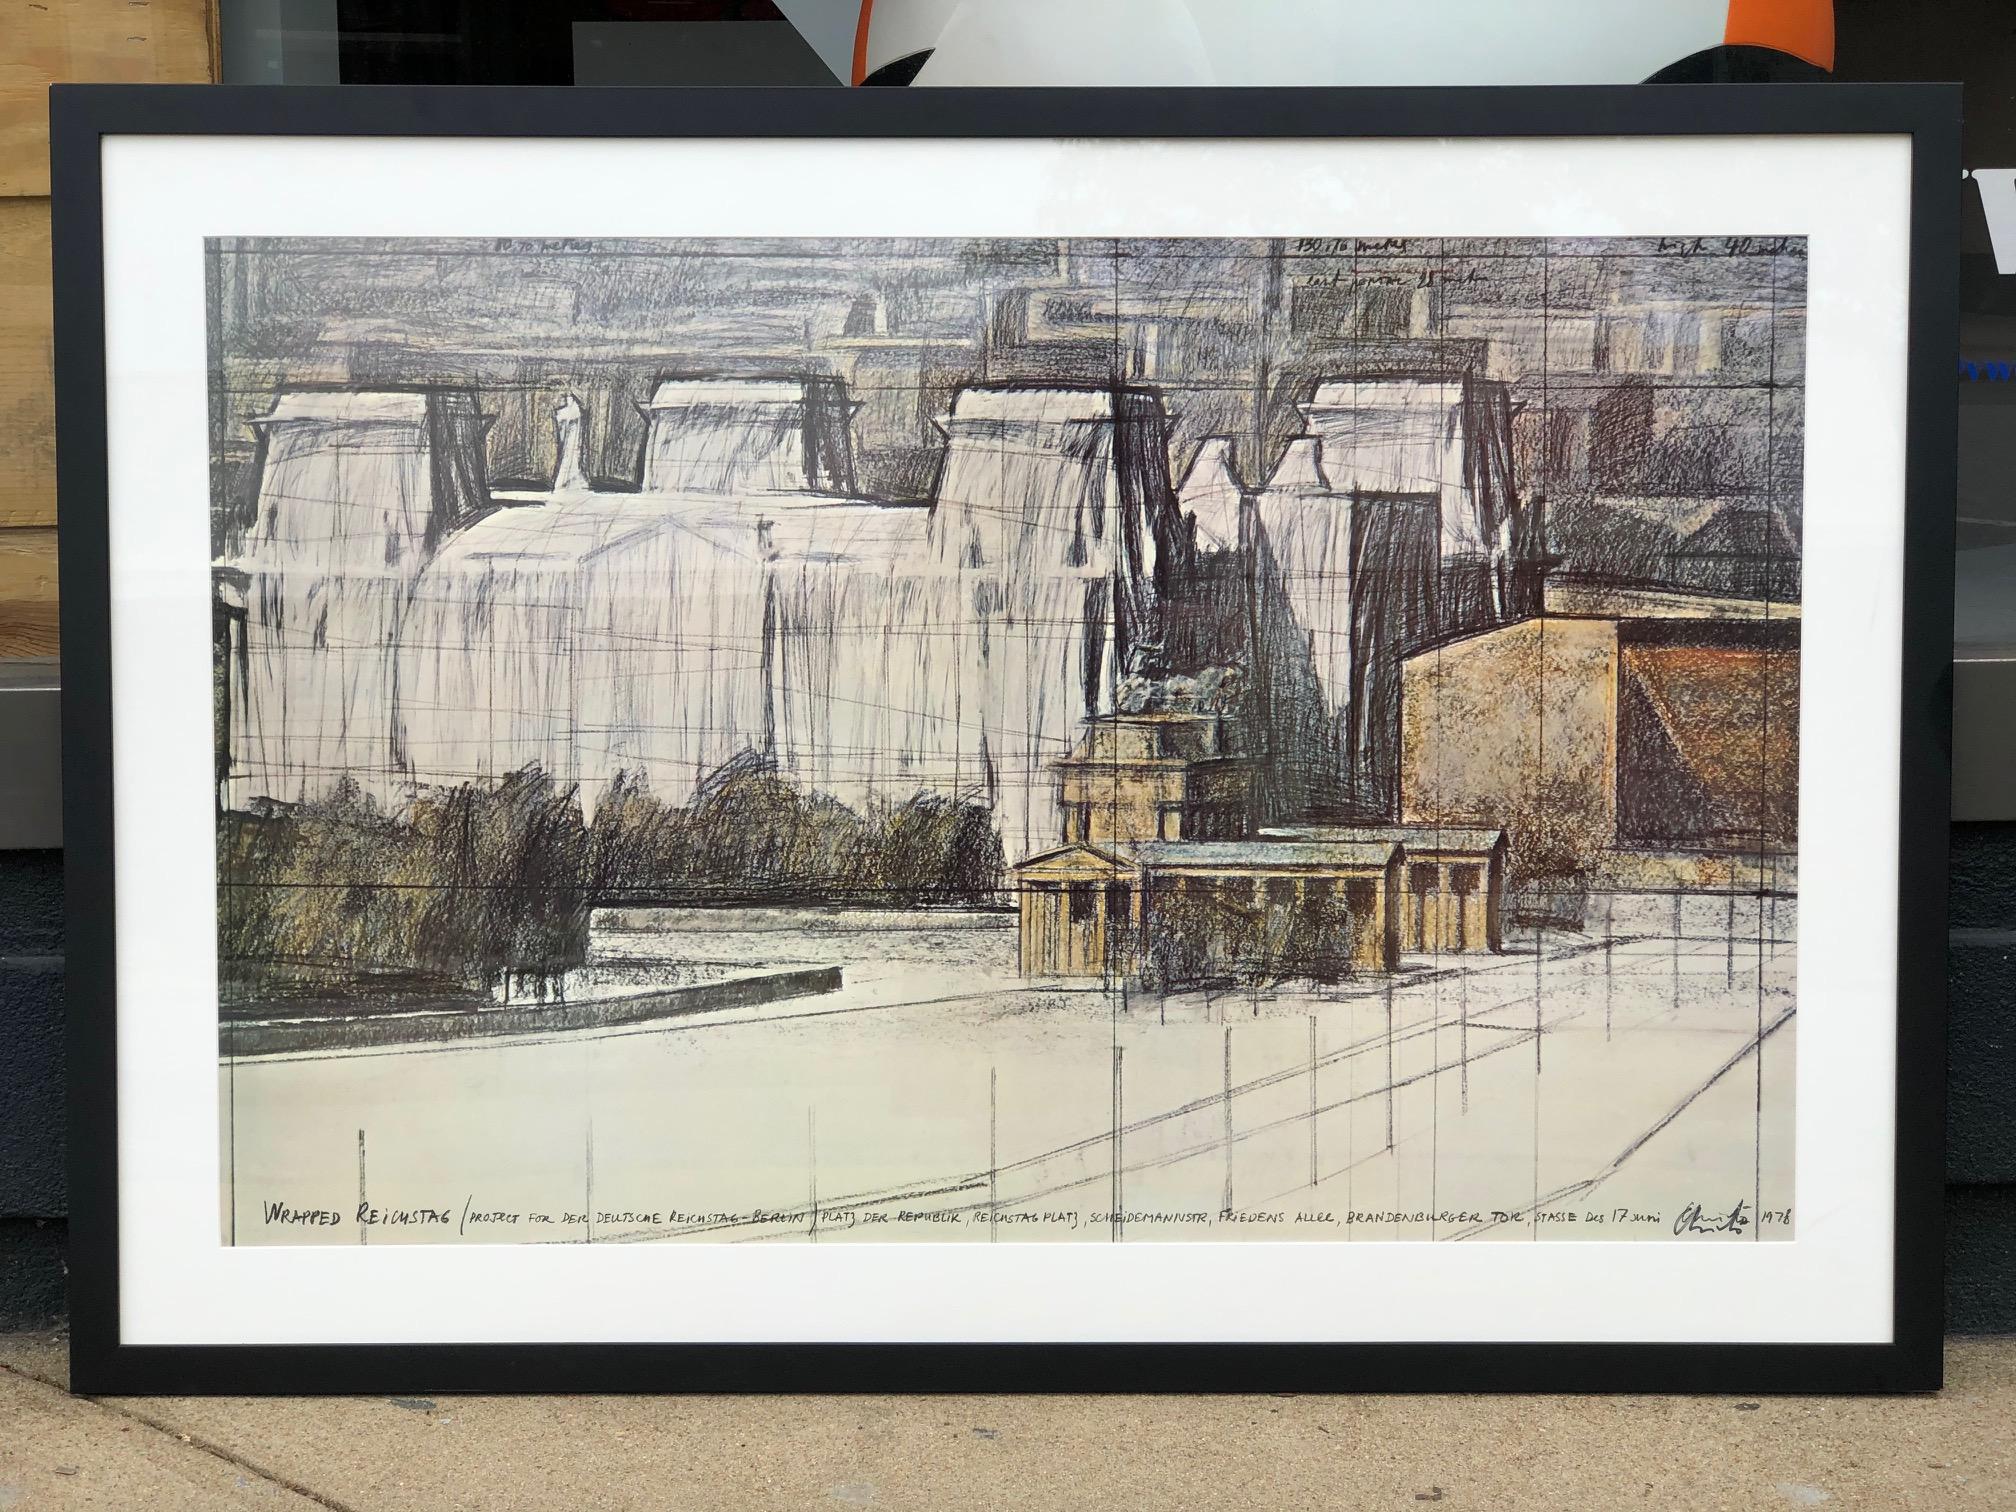 Wrapped Reichstag - Print by Christo and Jeanne-Claude